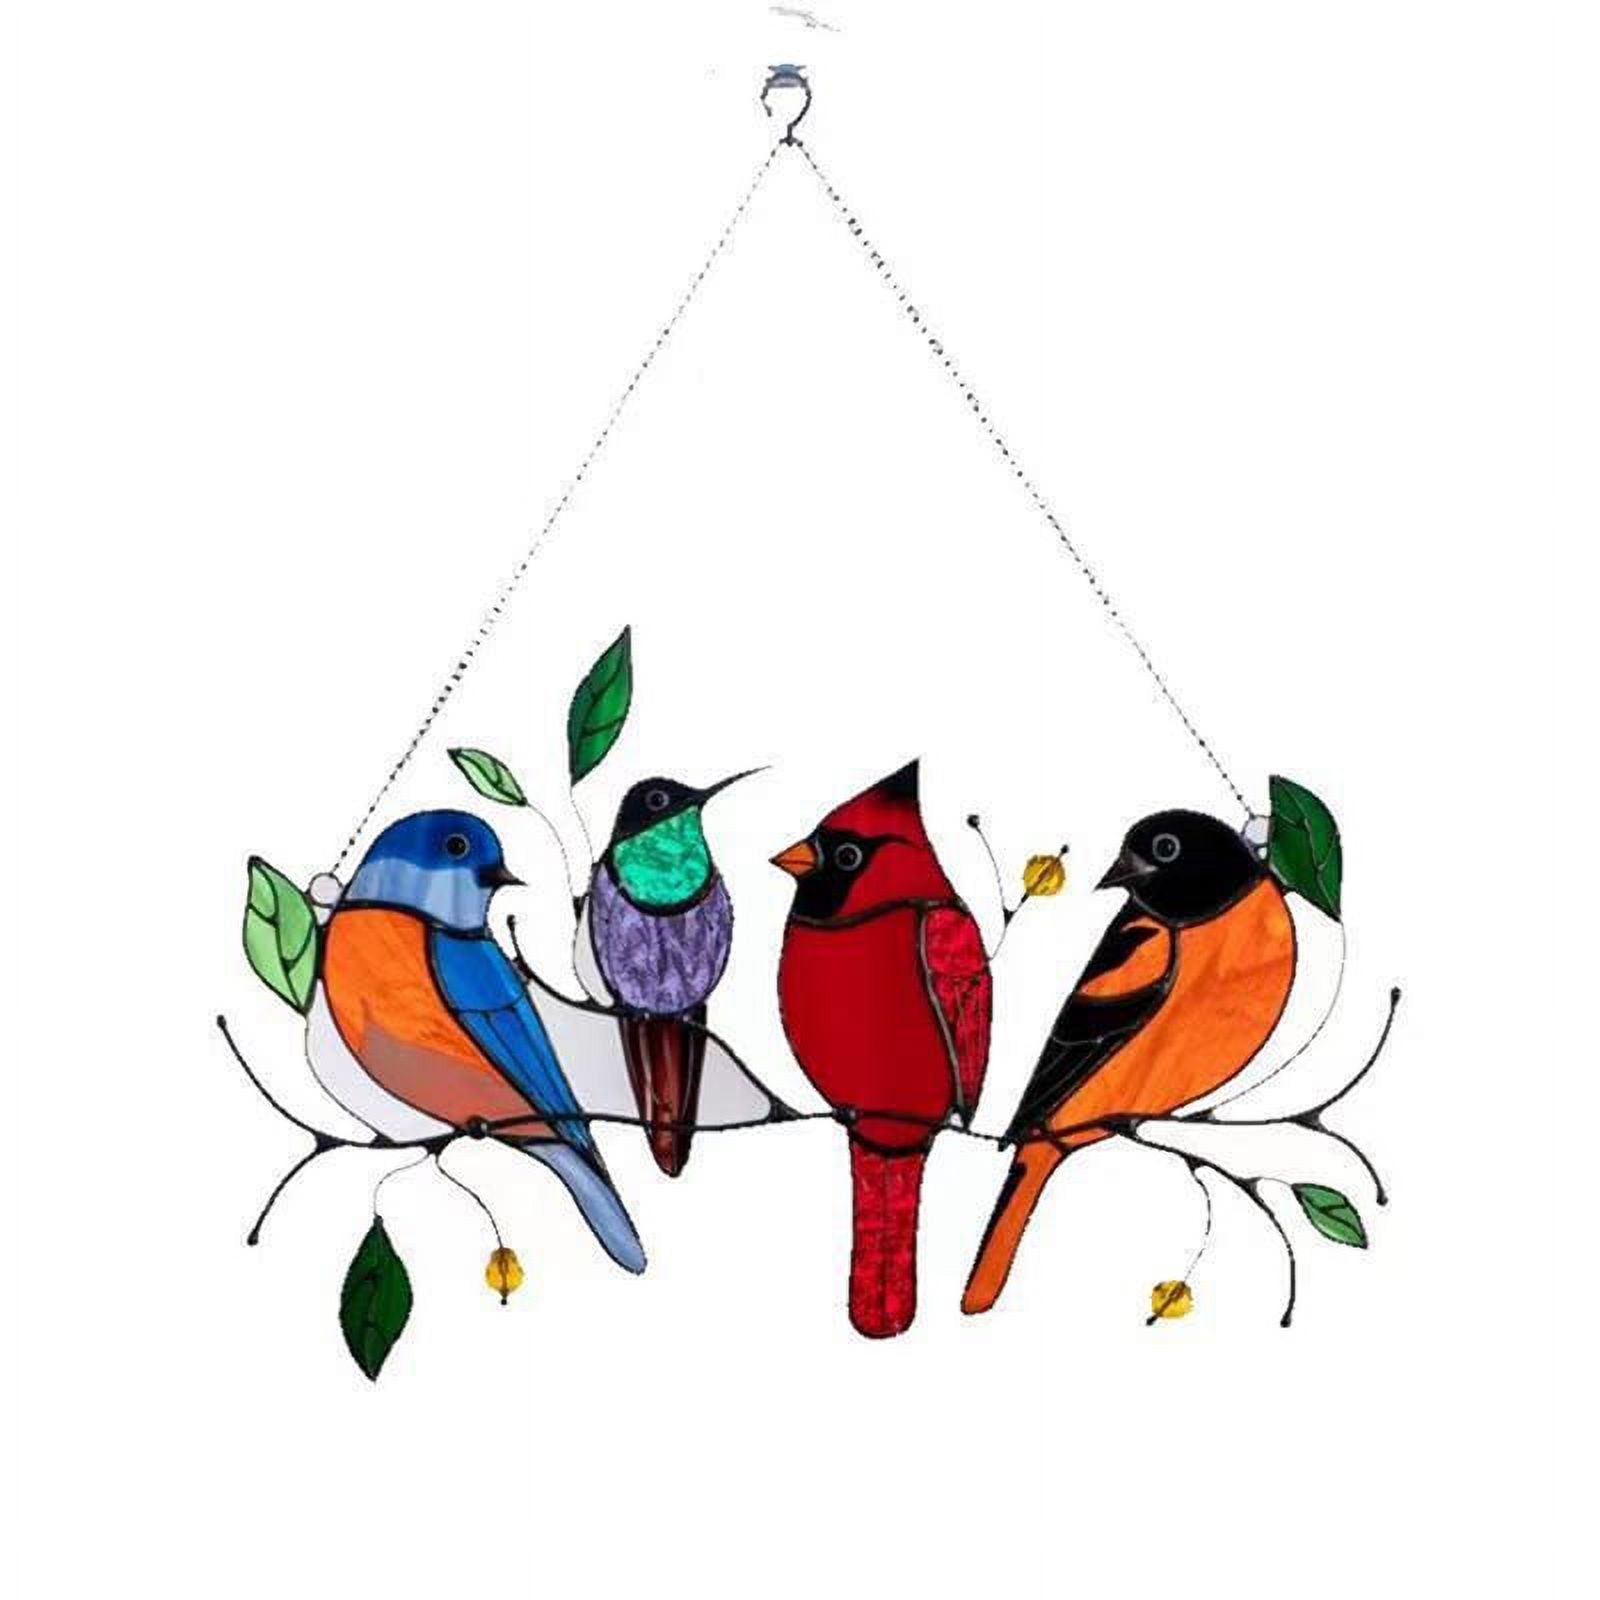 Multicolor Birds On A Wire High Stained Ornament Glass Suncatcher Window Panel,Bird Series Hanging Ornaments Pendant Home Decoration,Home Decor Gifts For Bird 1PC - image 1 of 10